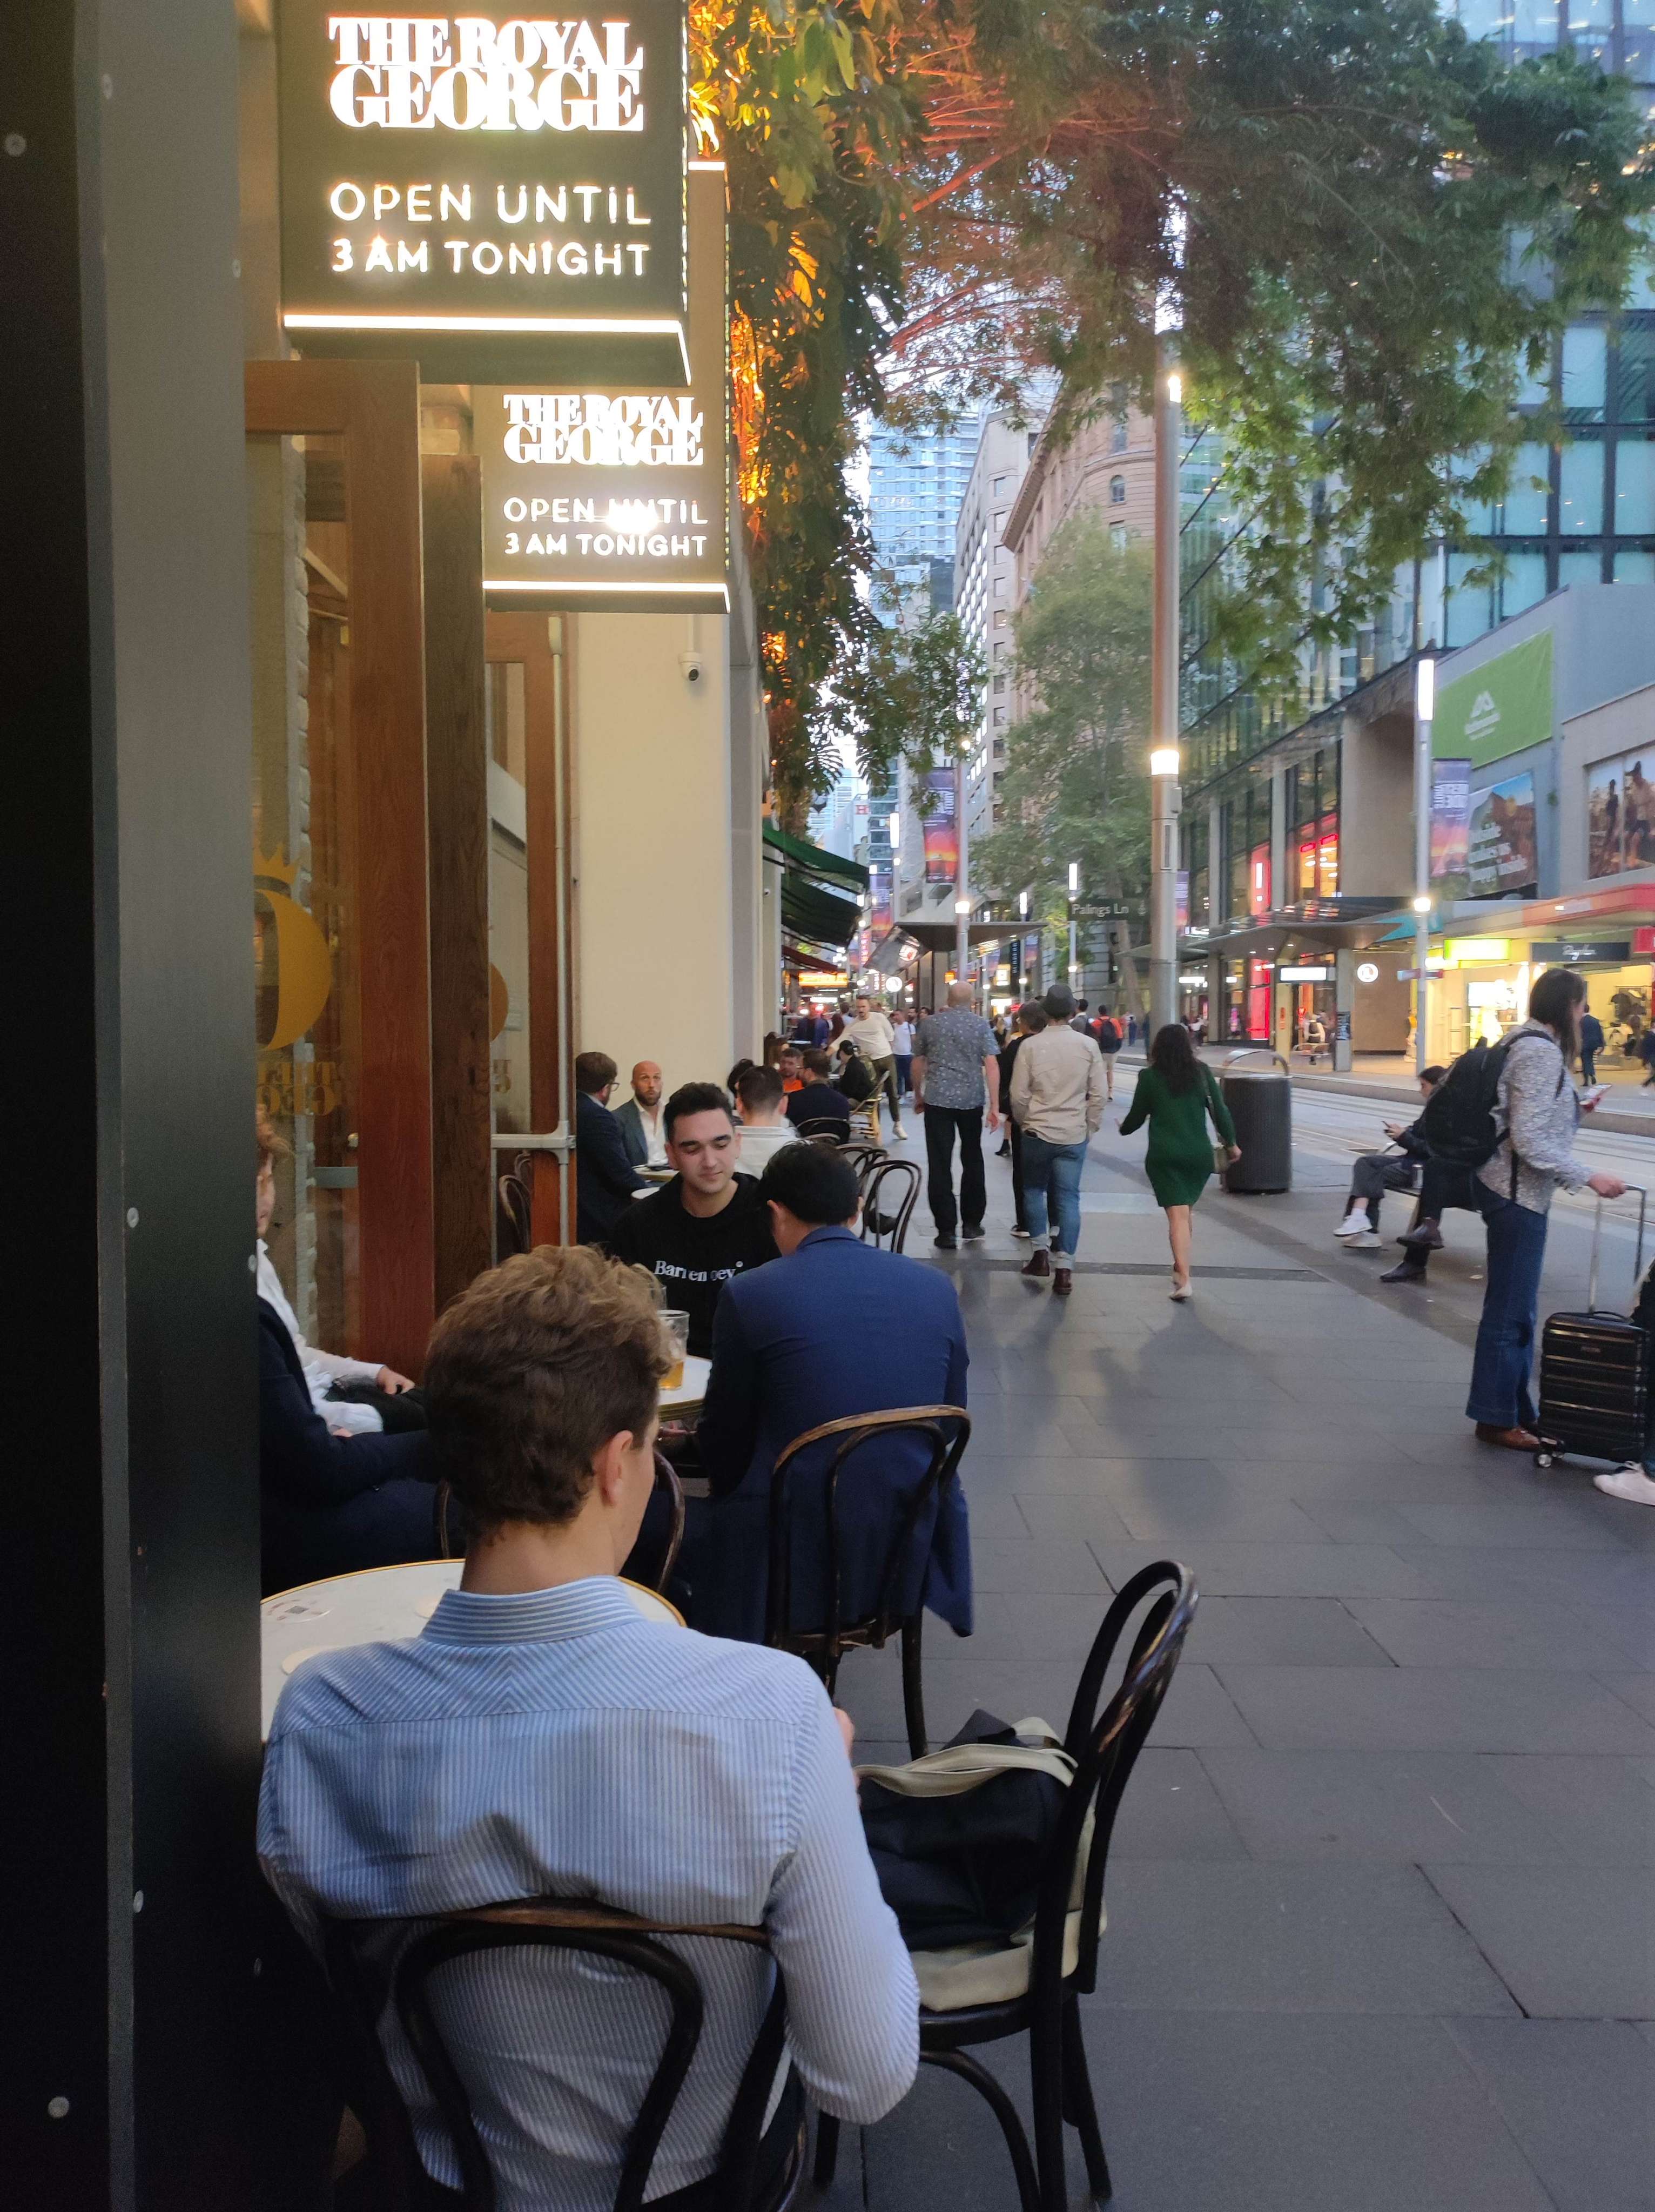 People sit outside a pub and restaurant in Sydney’s central business district on a recent weekday evening. Photo: Su-Lin Tan